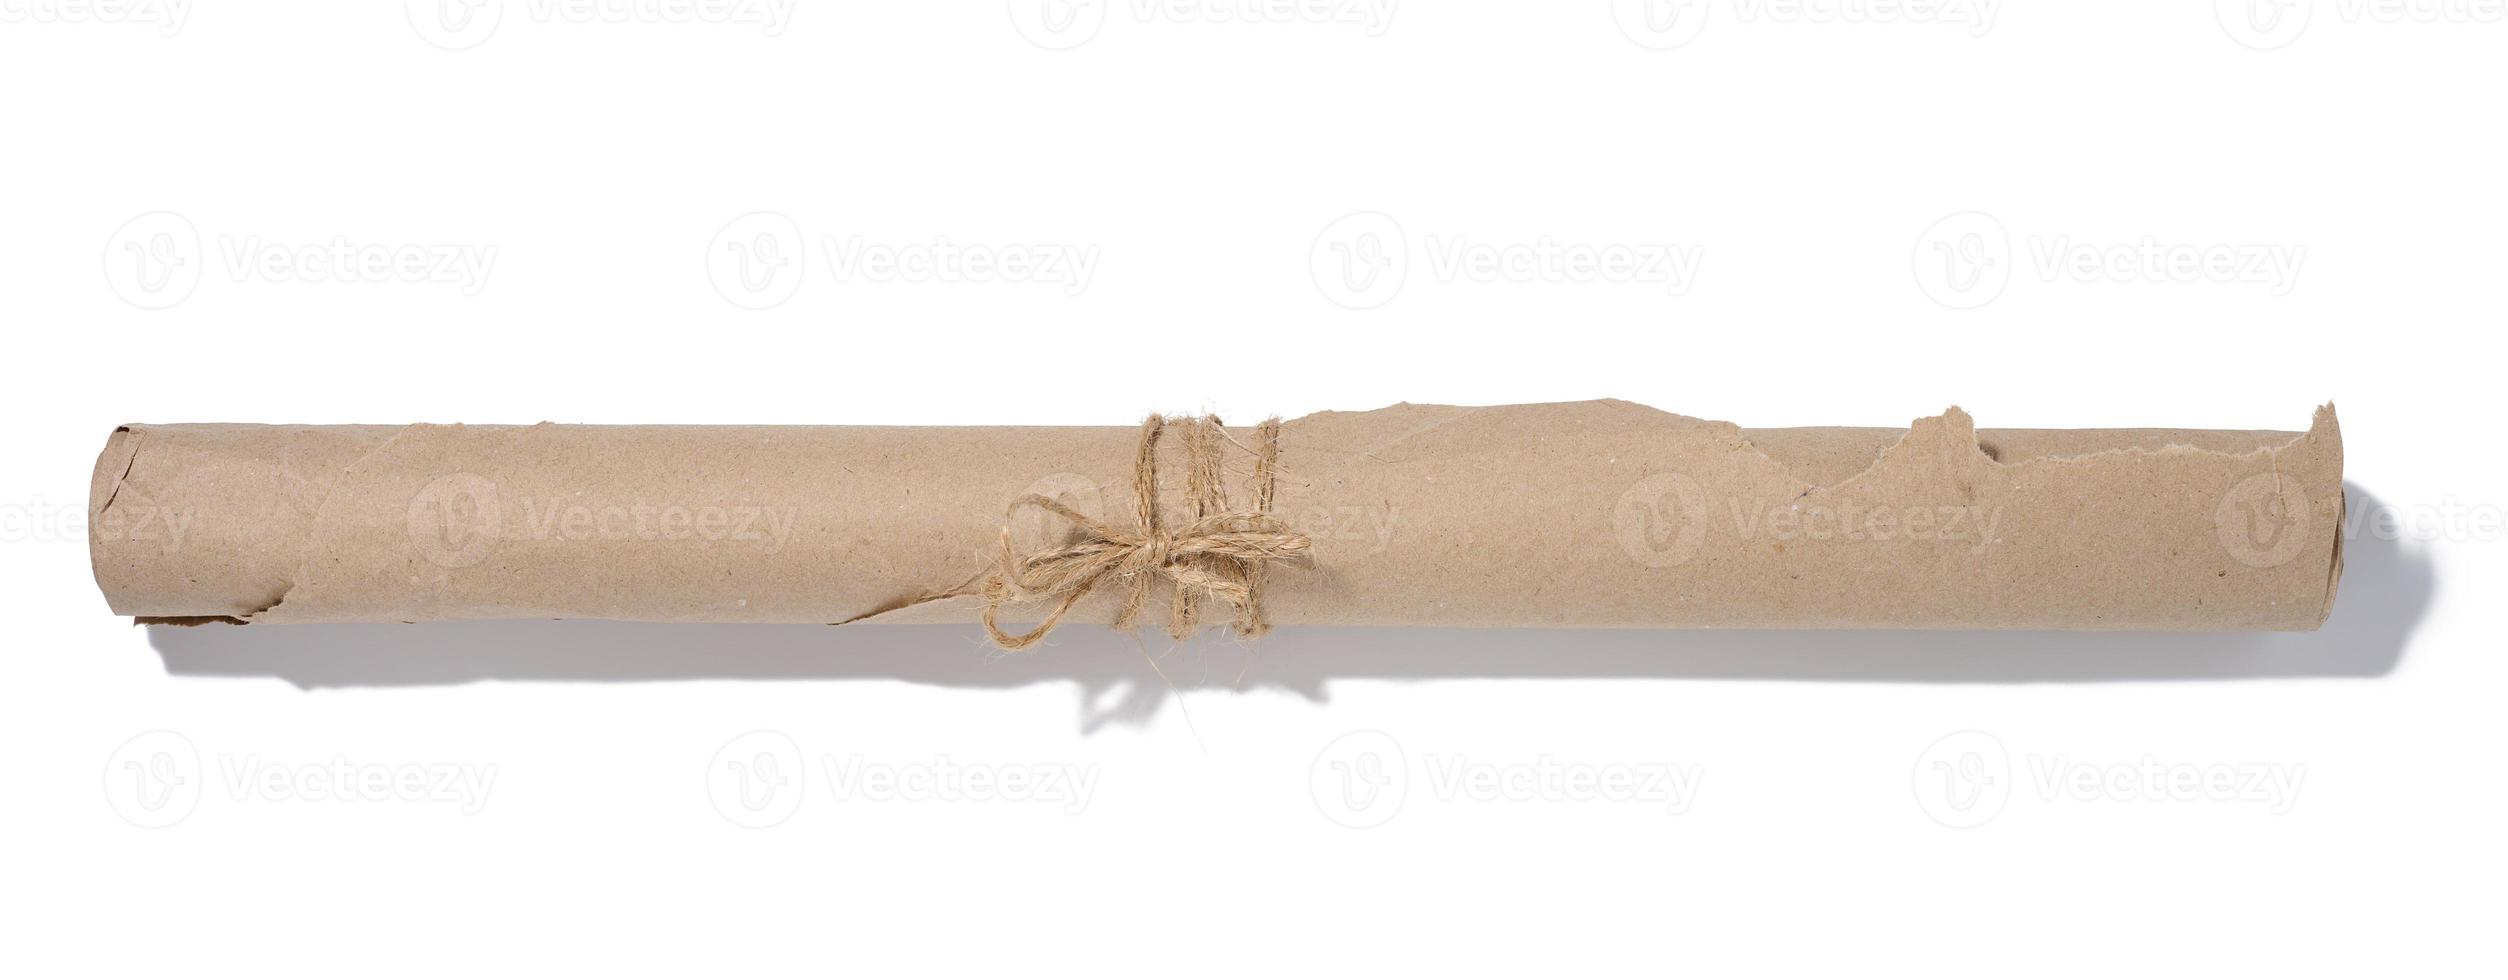 Twisted brown wrapping paper in a roll and tied with a rope on a white background photo